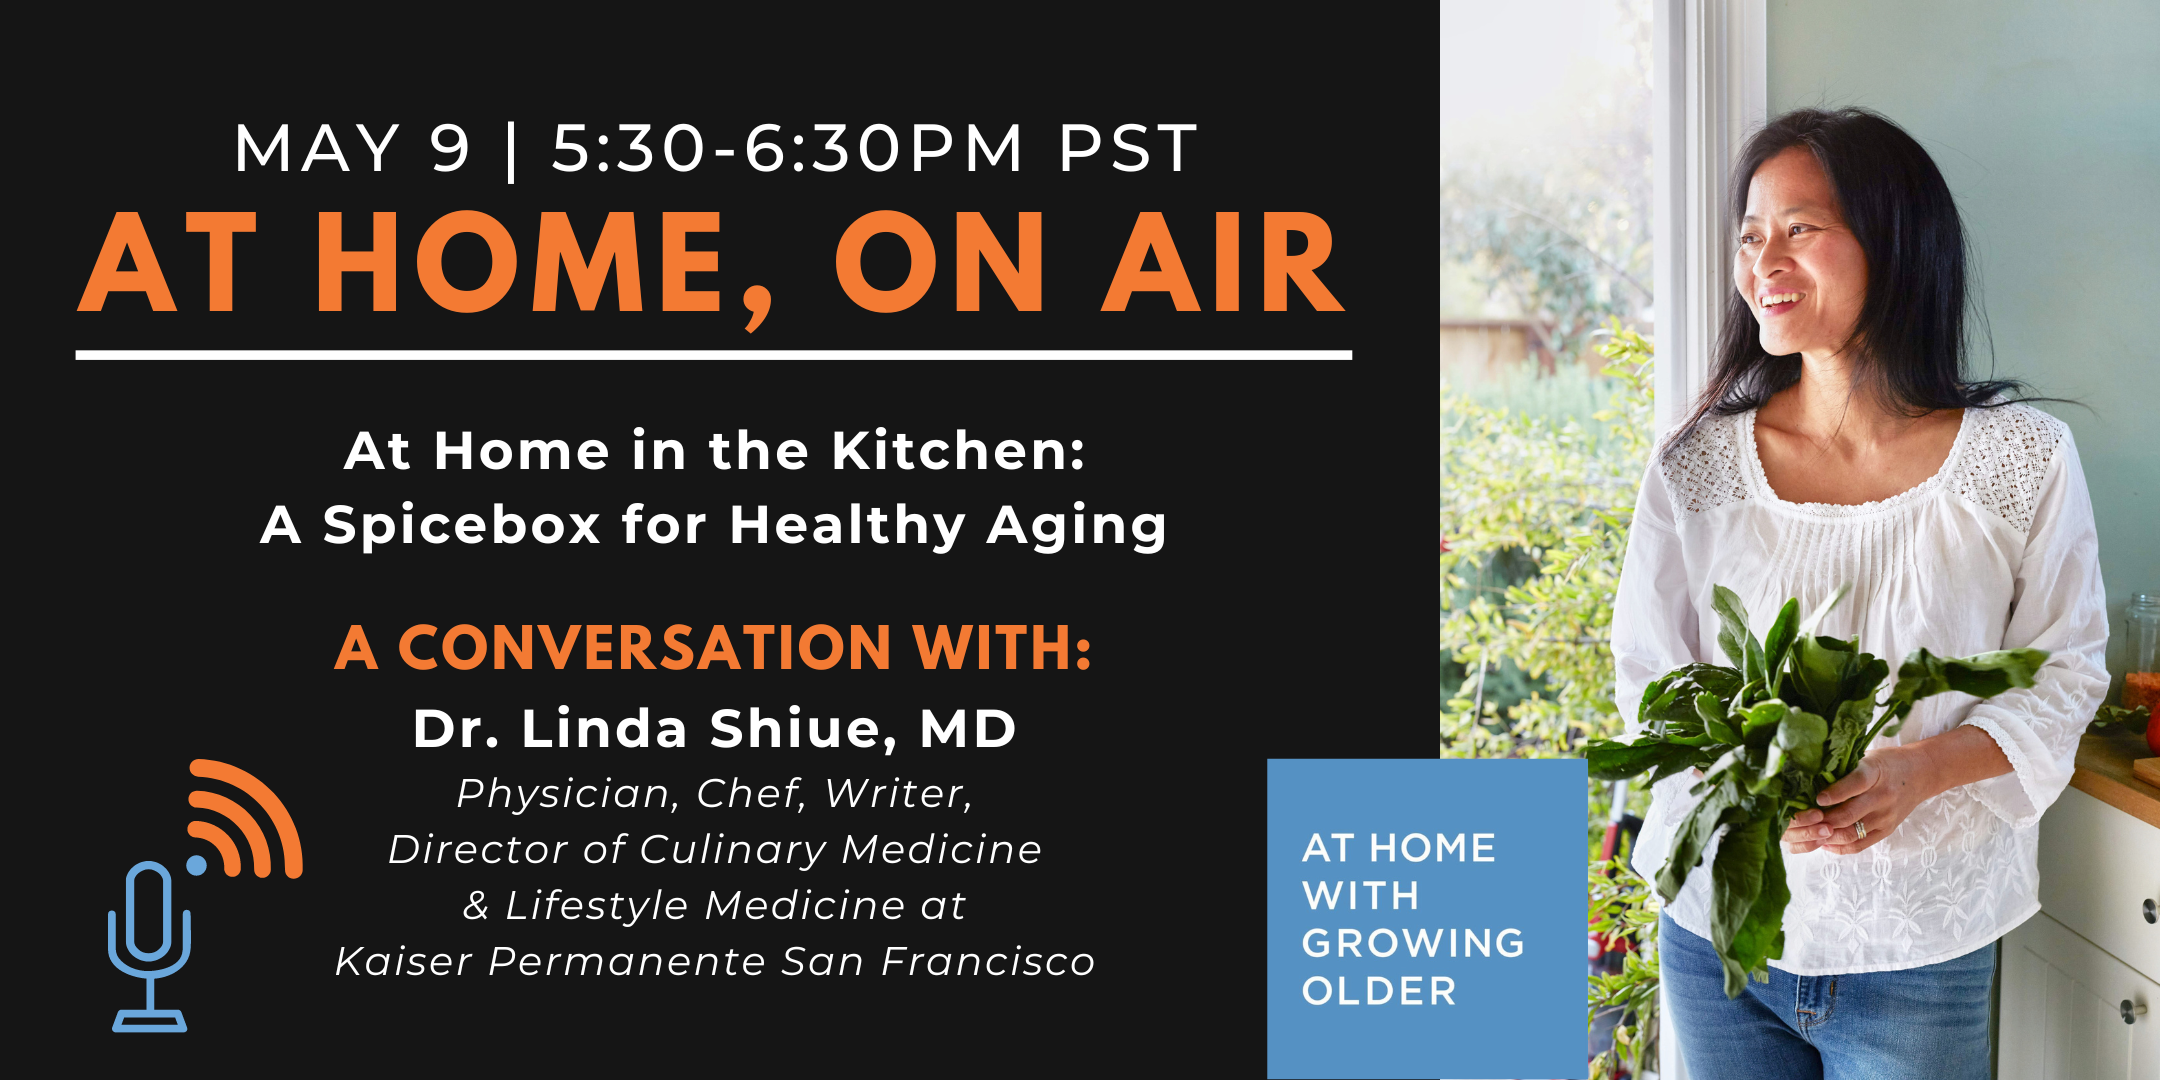 At Home, On Air: A Conversation with Dr. Linda Shiue